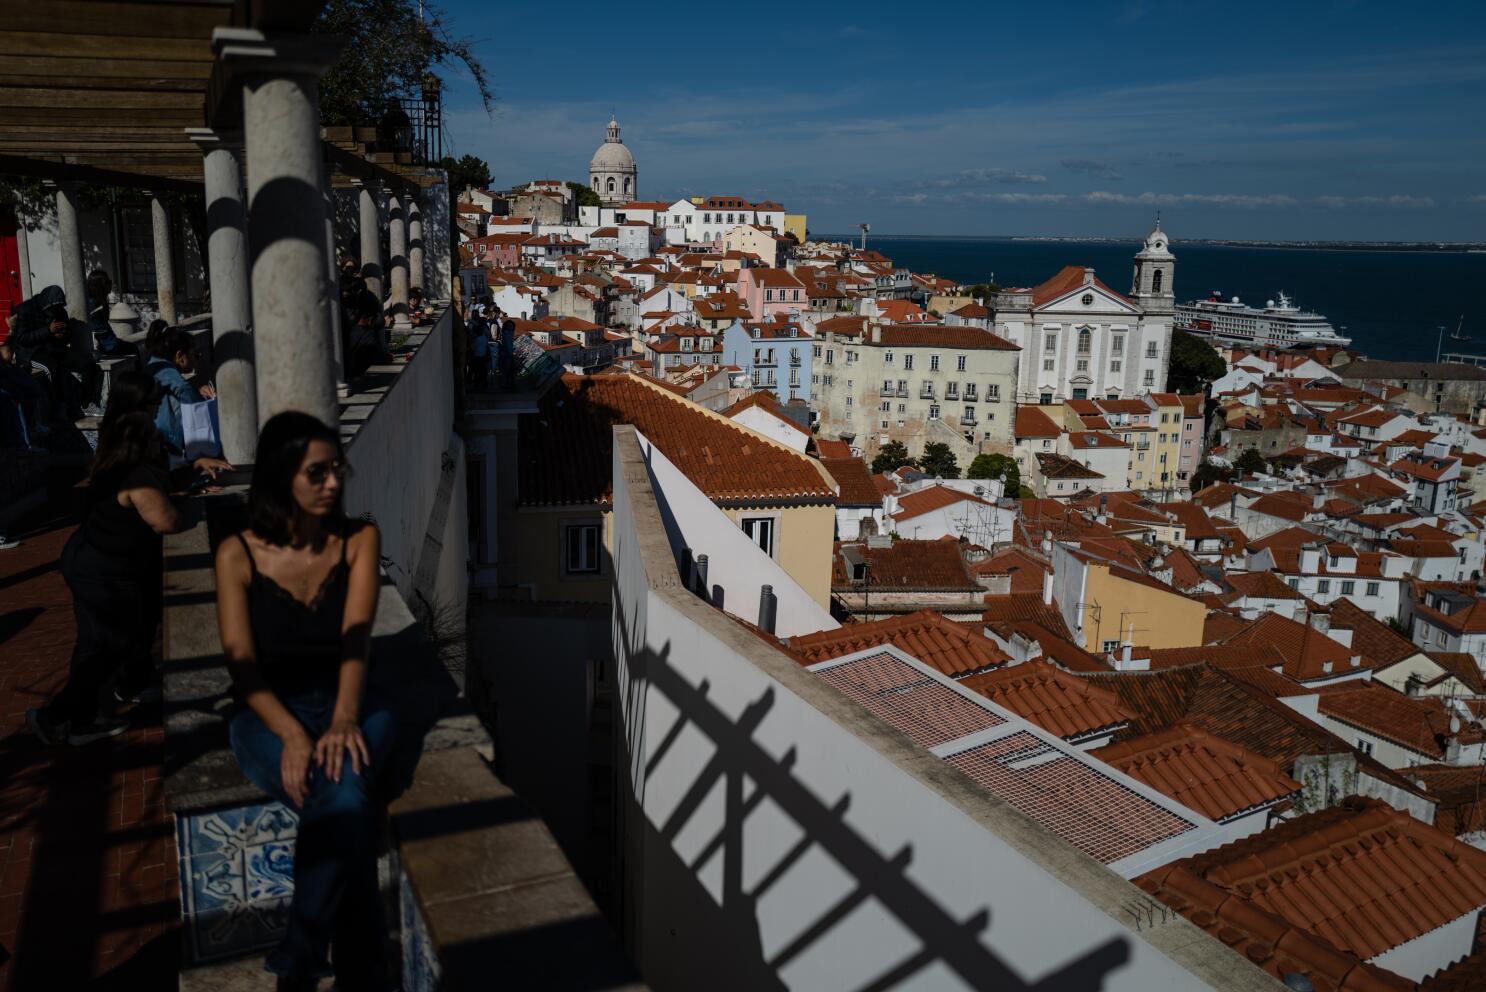 63 Photos of Porto, Portugal - A Visual Travel Guide You'll Love